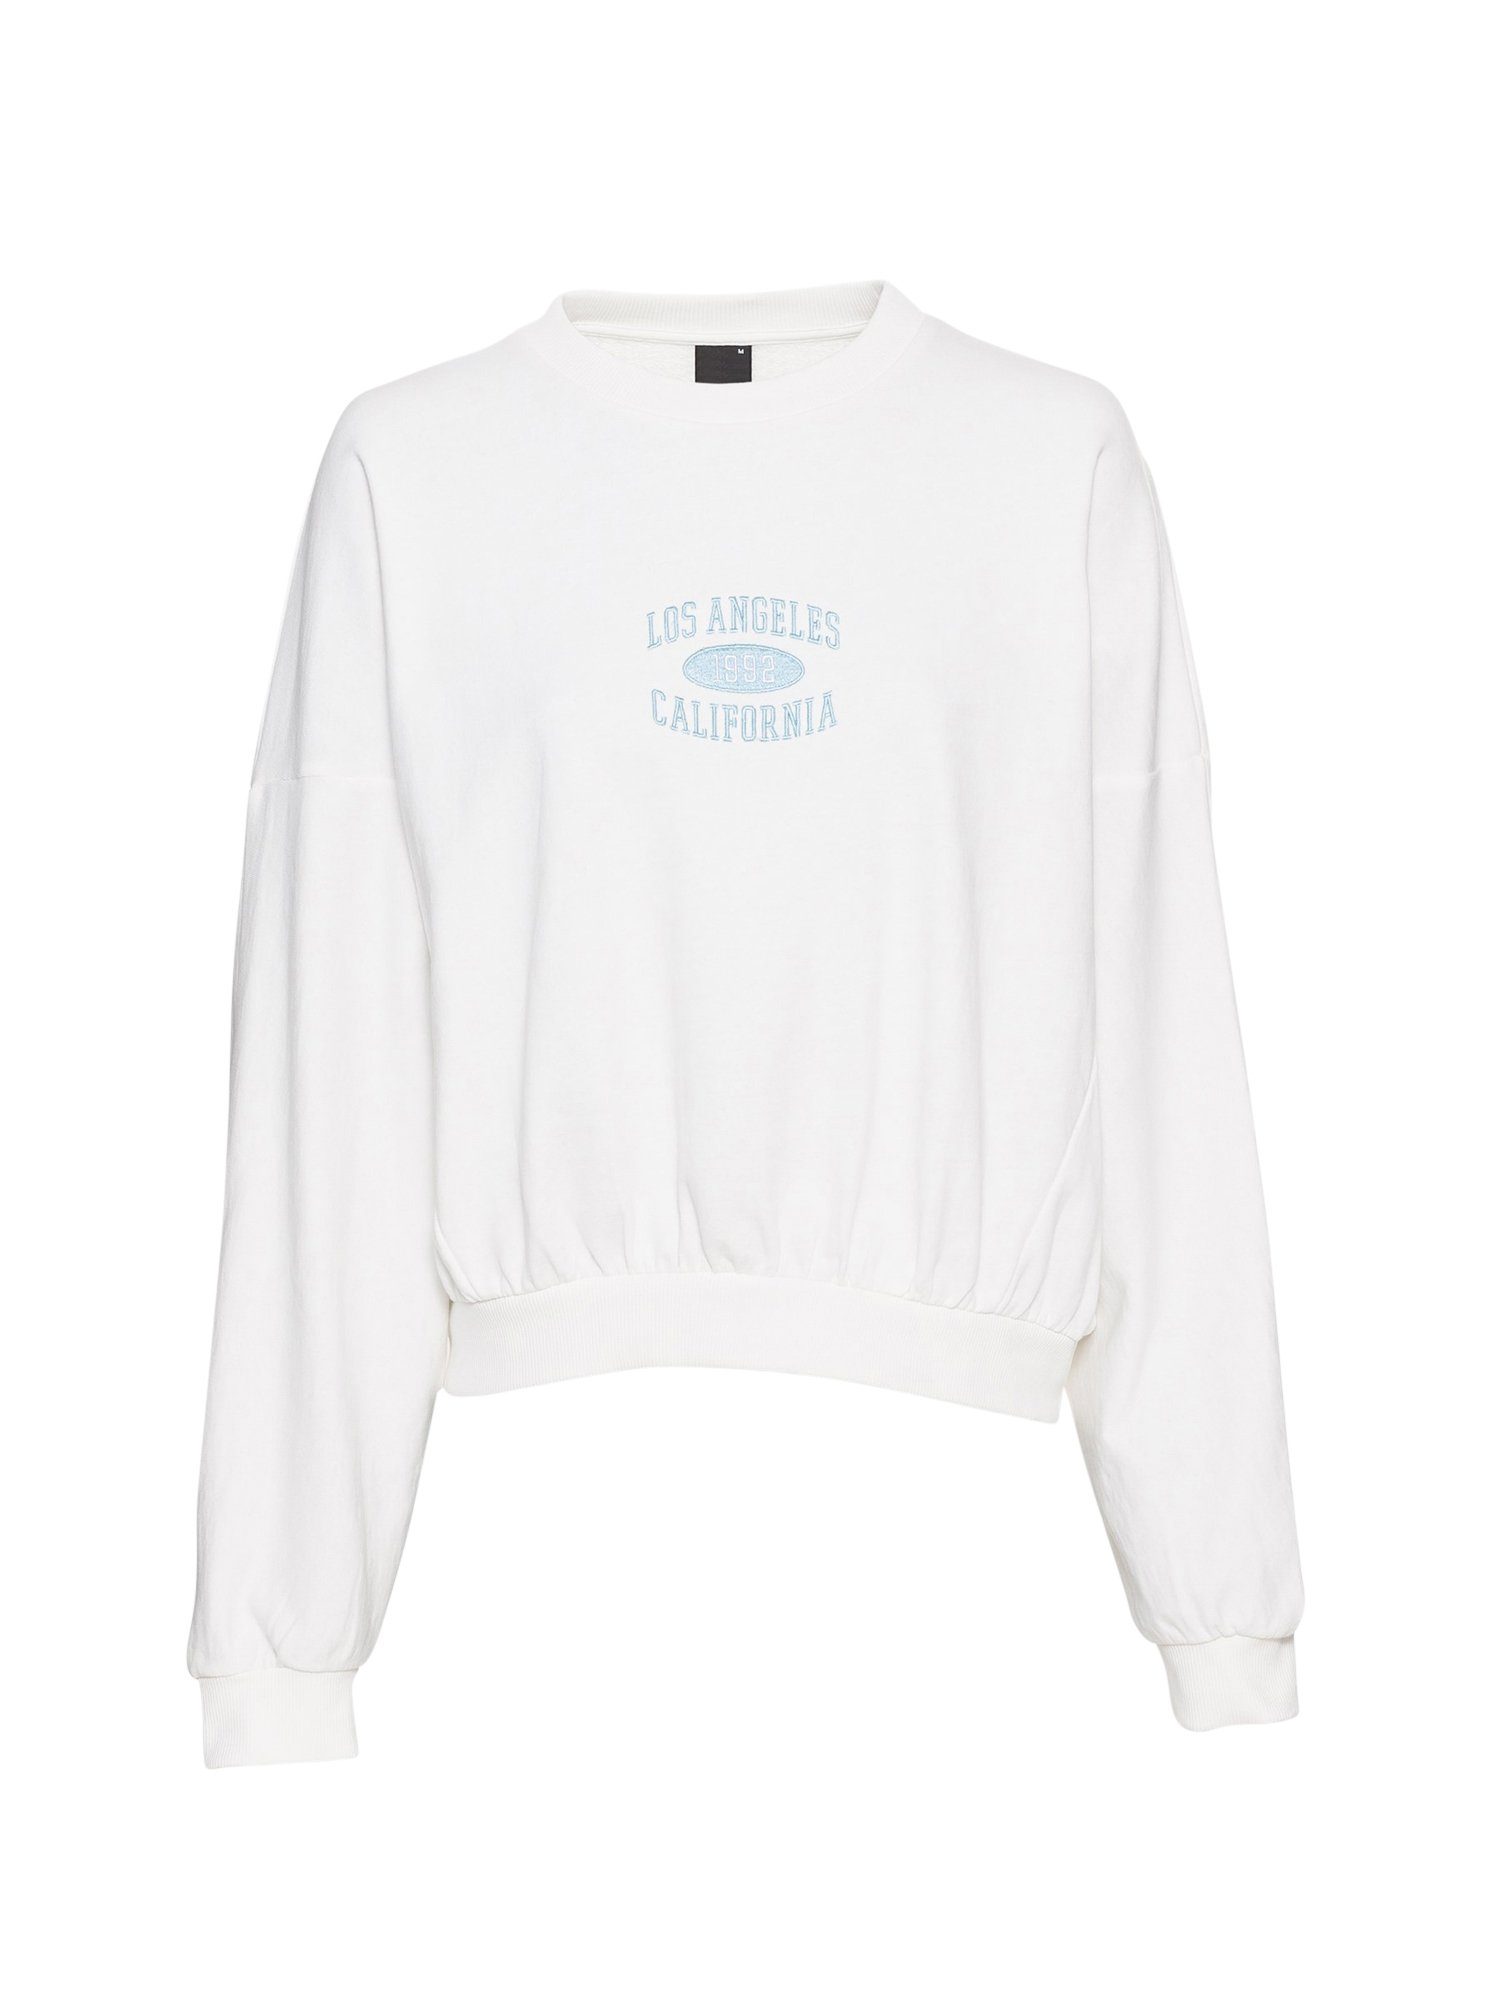 Freshlions Sweater Gina Tricot Eve Pullover Creme